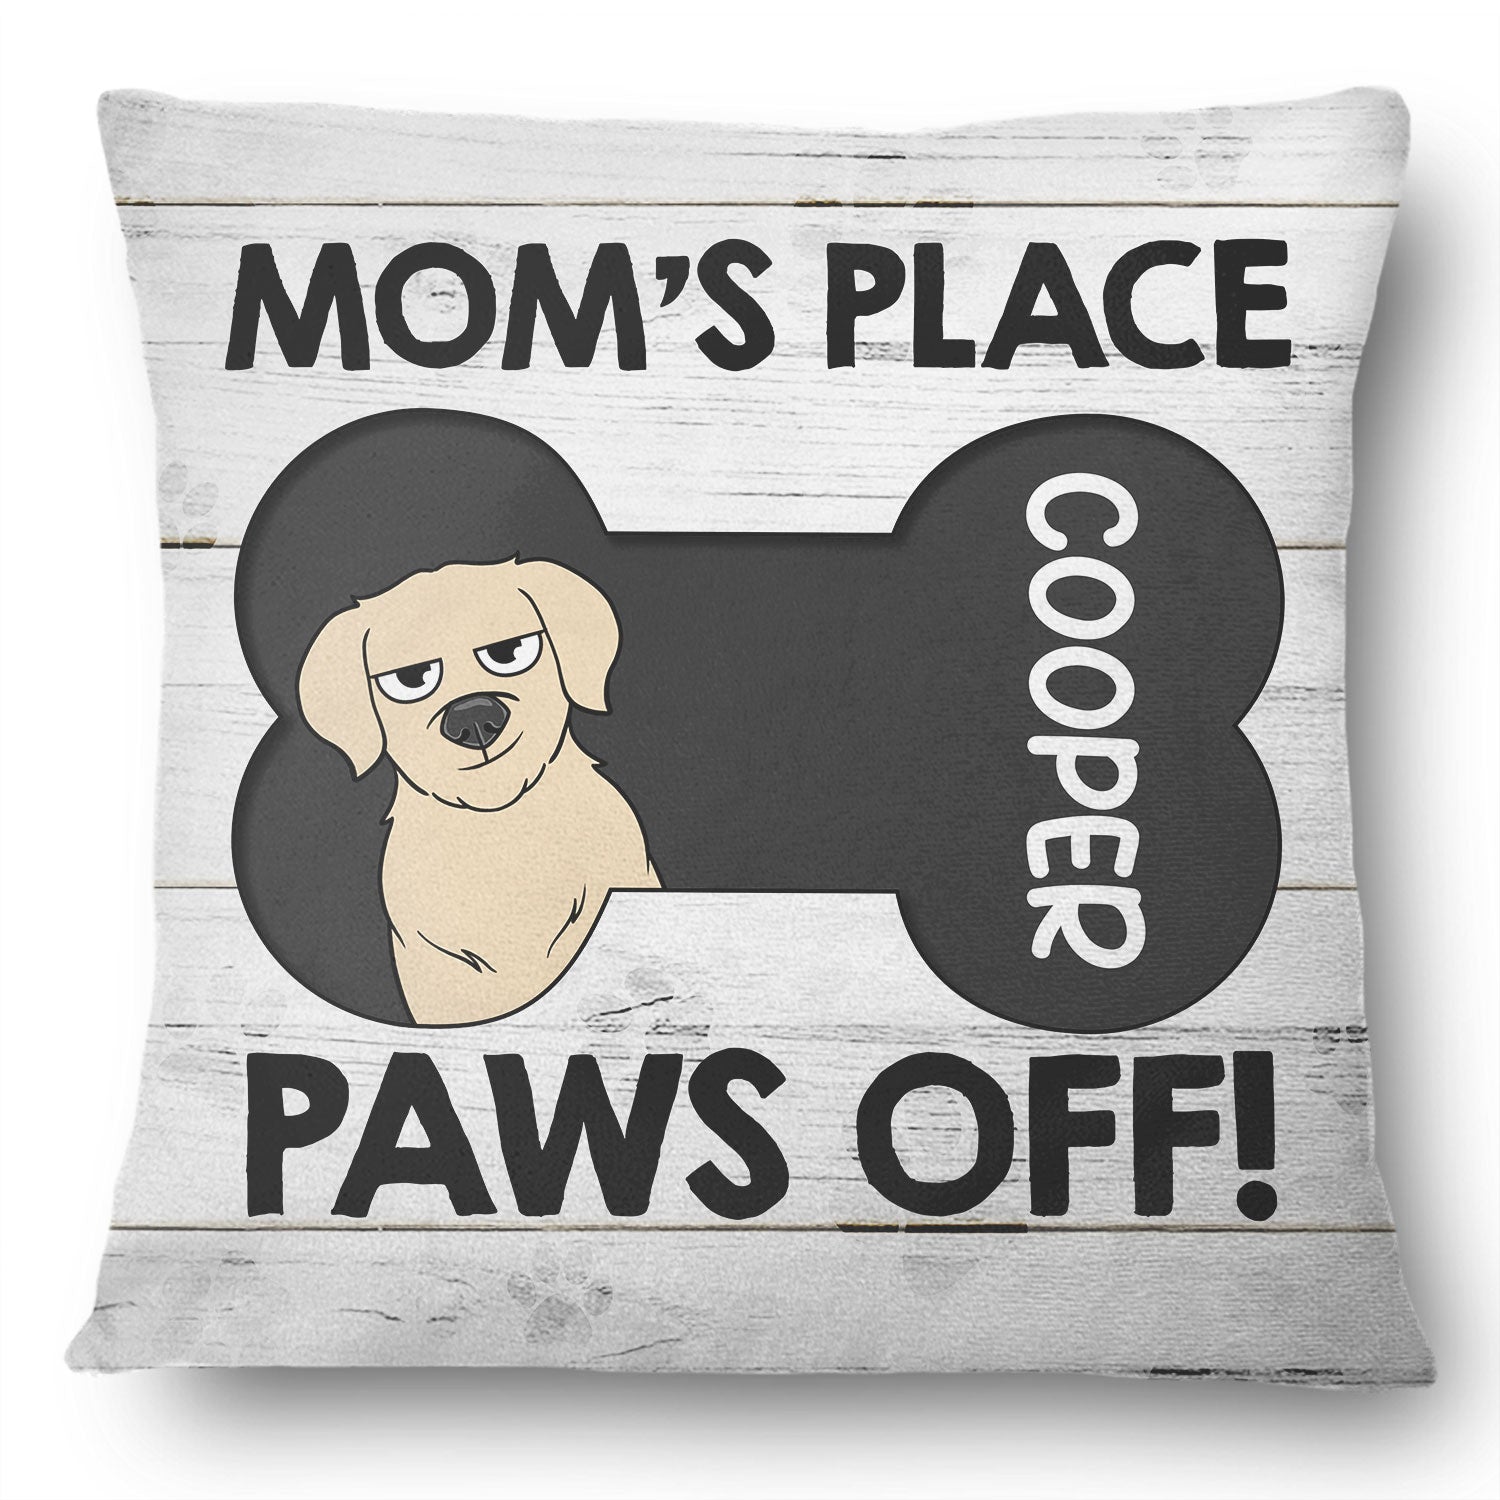 Place Paws Off - Gift For Dog Lovers - Personalized Pillow